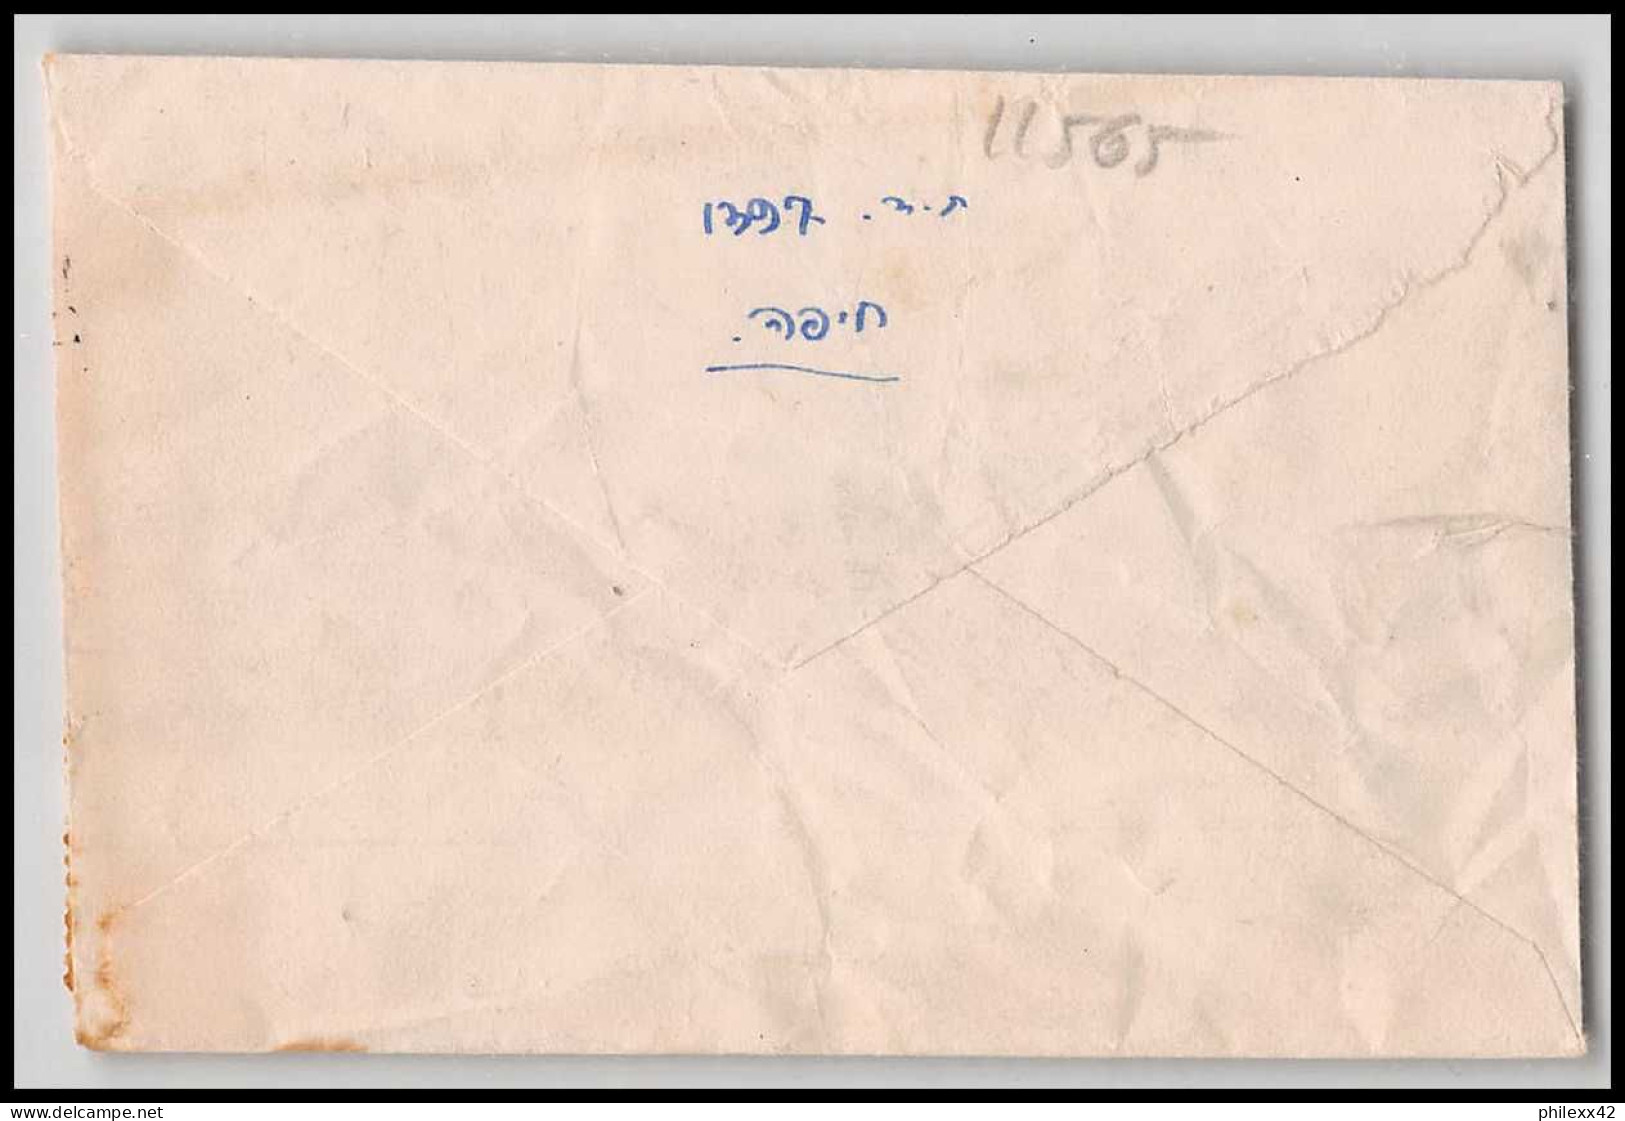 11554 collection / lot de 21 coin 1950's lettres cover israels 